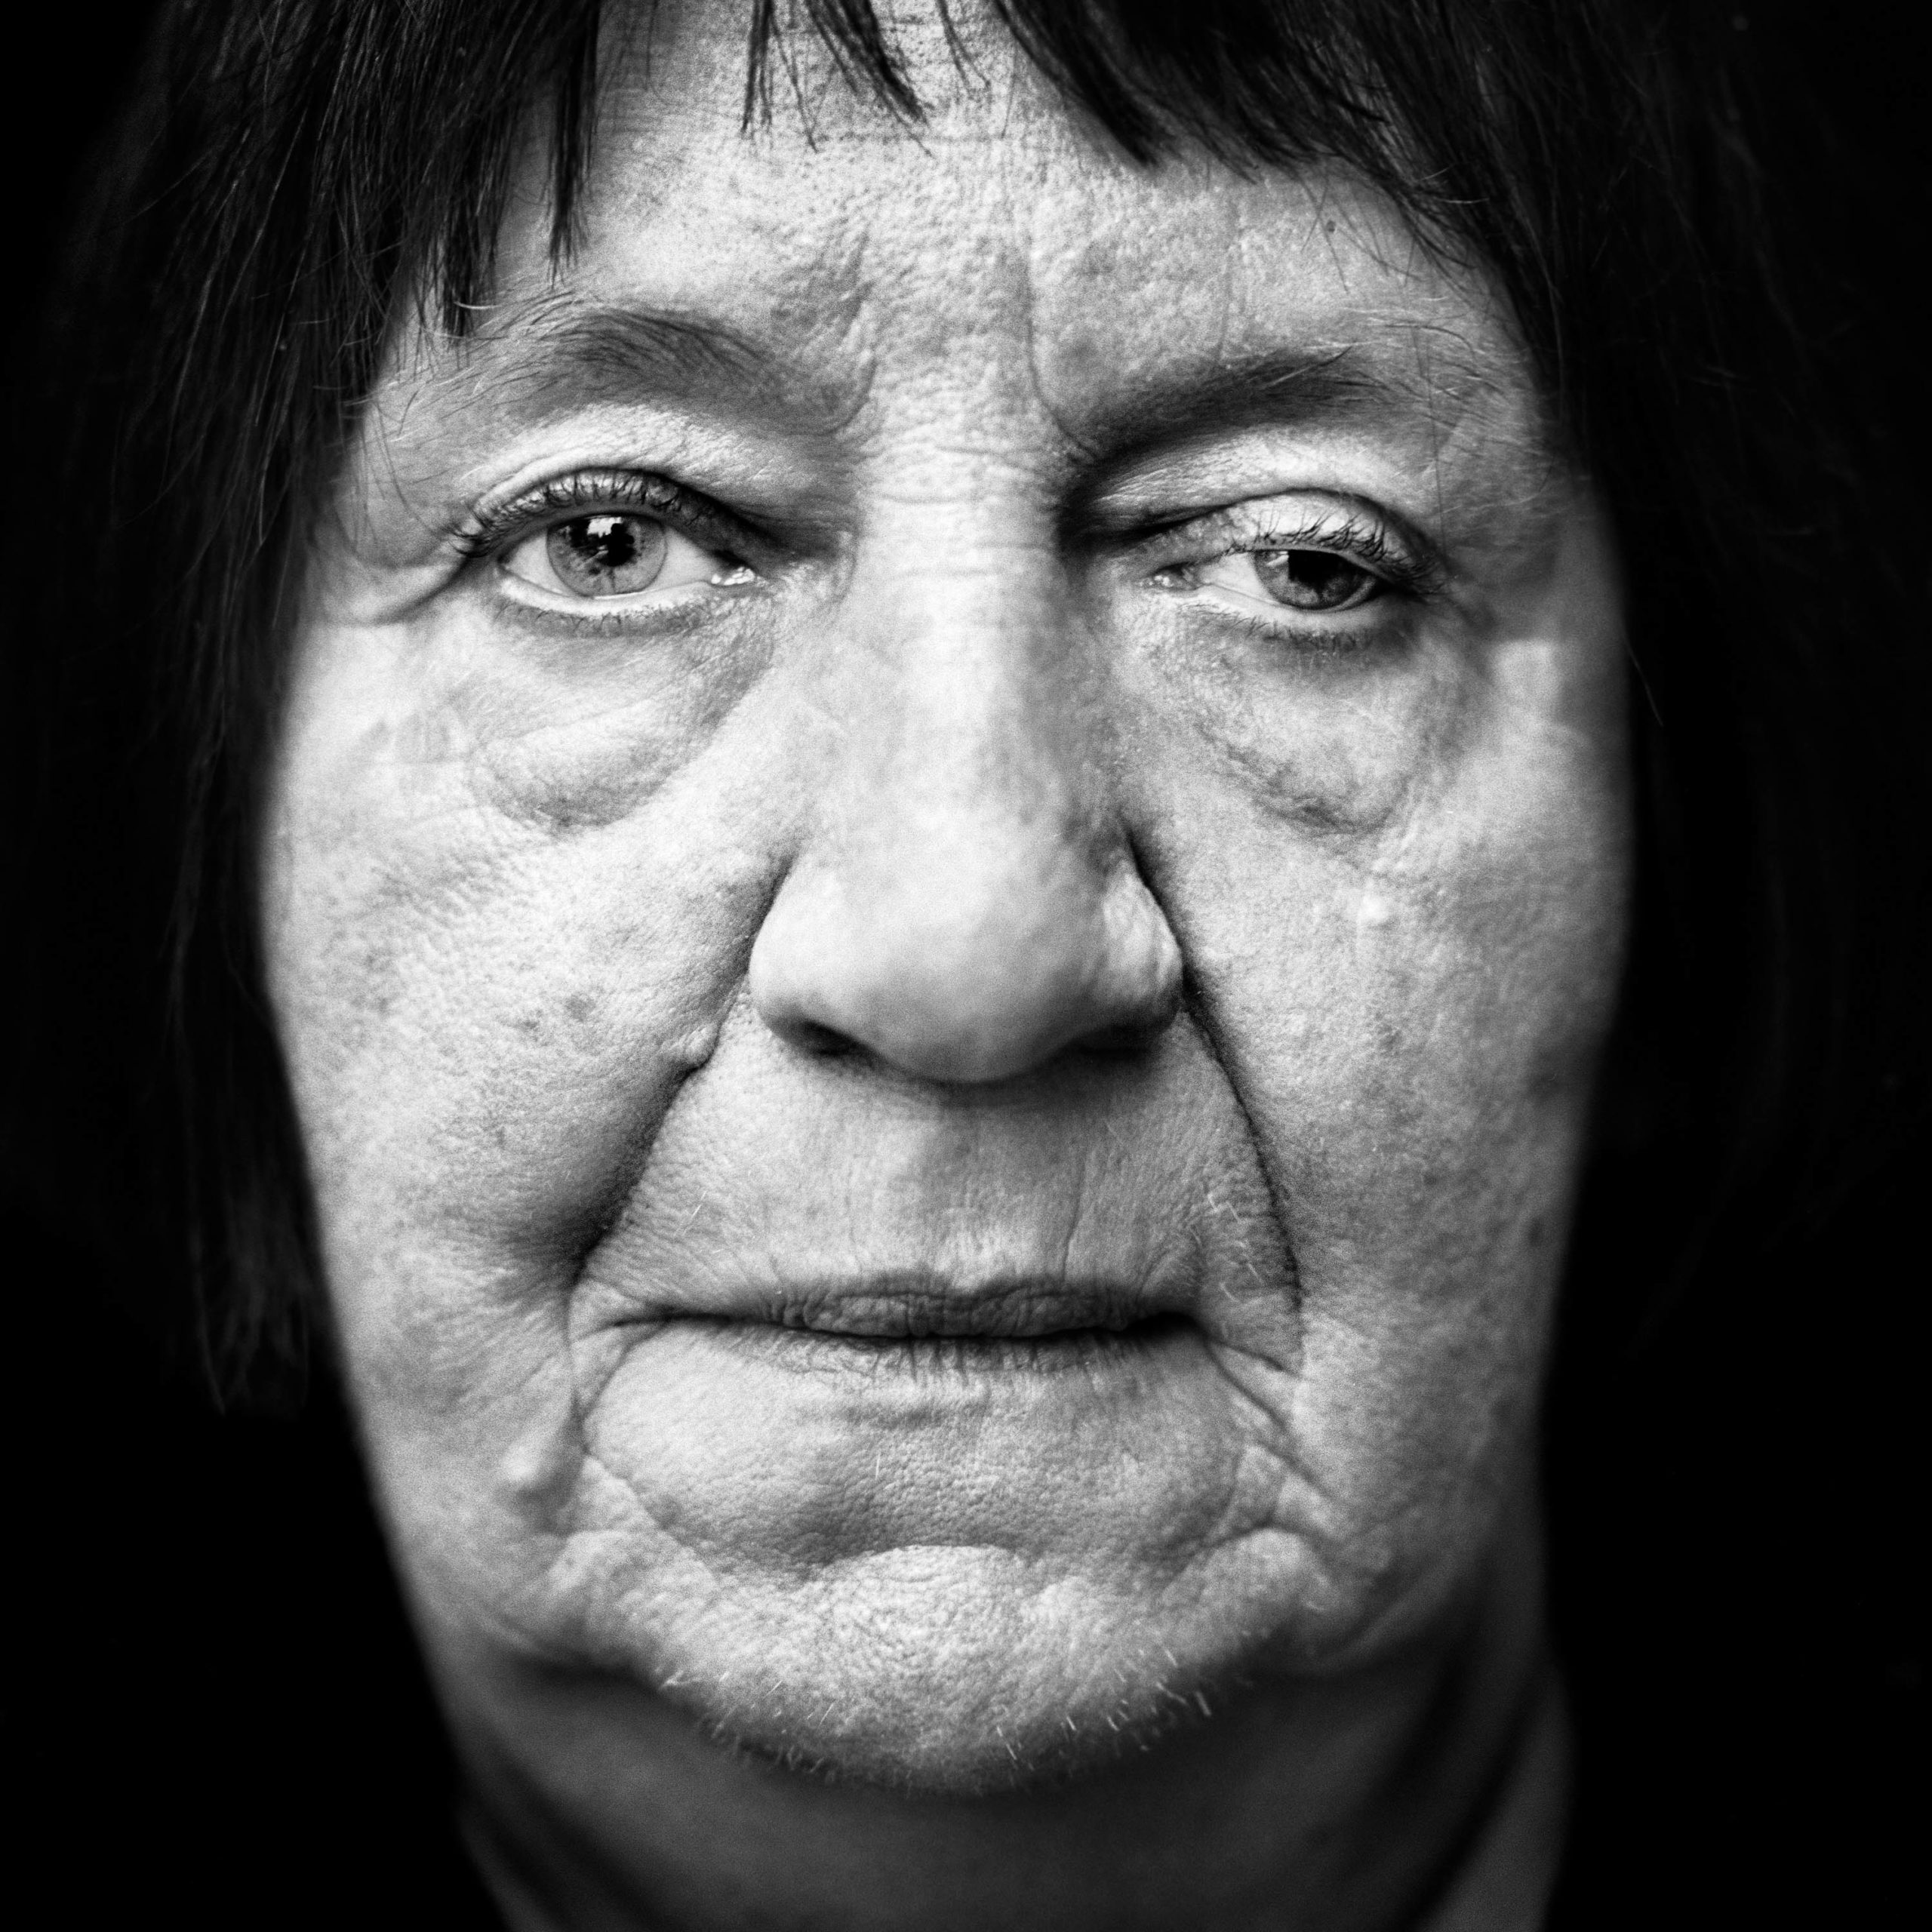 Helene Boppert (Germany, 1938). Interview outtake: “The Americans dropped incendiary bombs on our street. Sixty-five people were killed. My father was killed, and both my brothers were killed. I was unconscious when slave laborers rescued me from our burning house. Both my legs were broken, and I could hardly see a thing.”